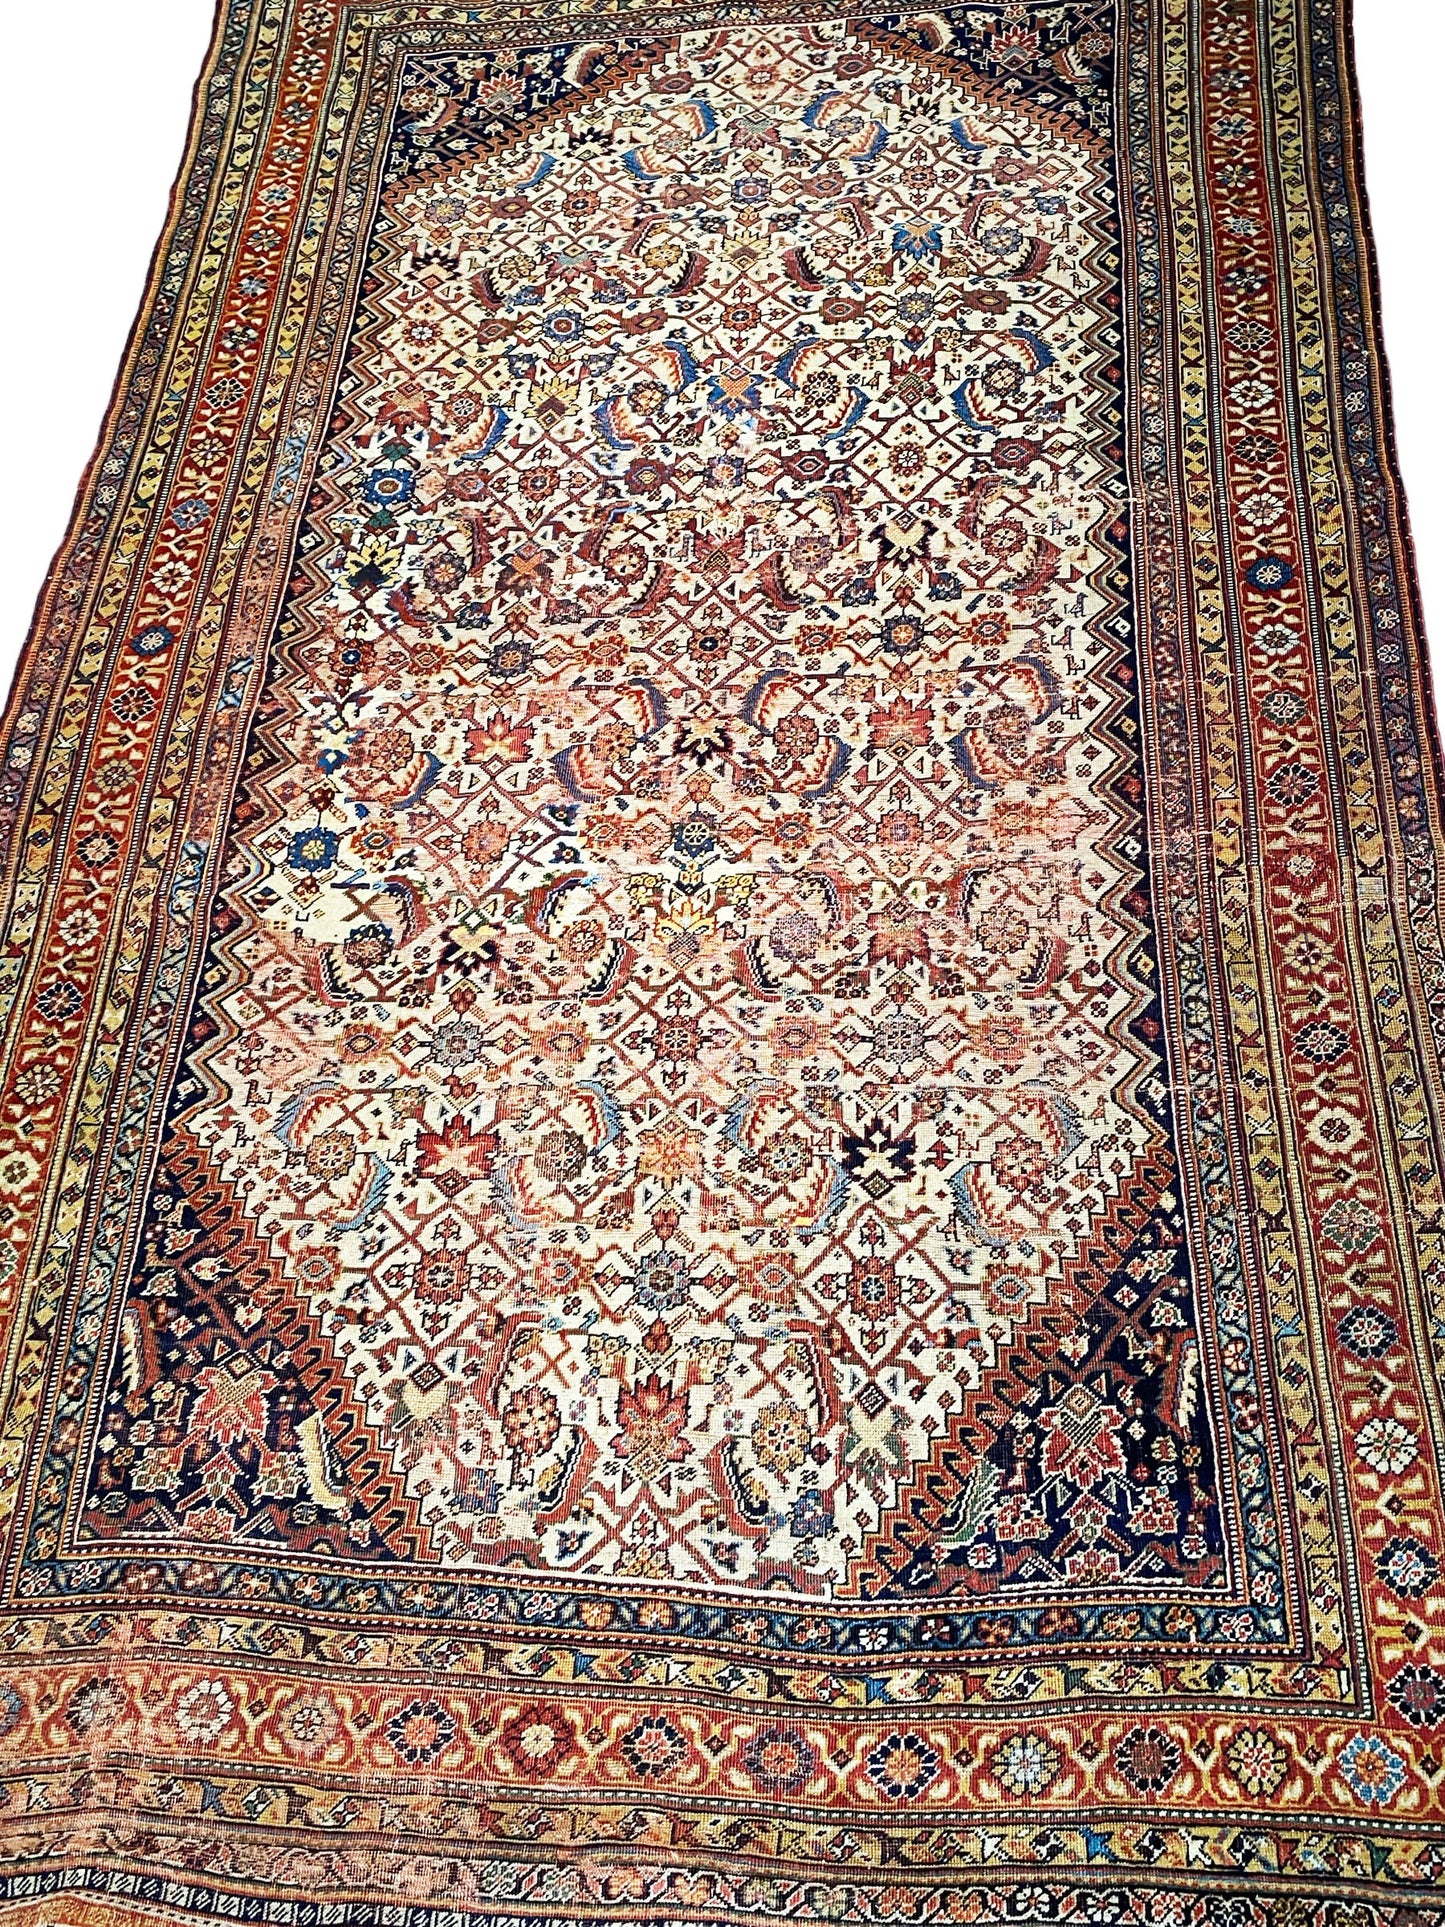 #5960 Antique  19th c Qashqai  Rug with All Over Design 8'75" by 4'92"